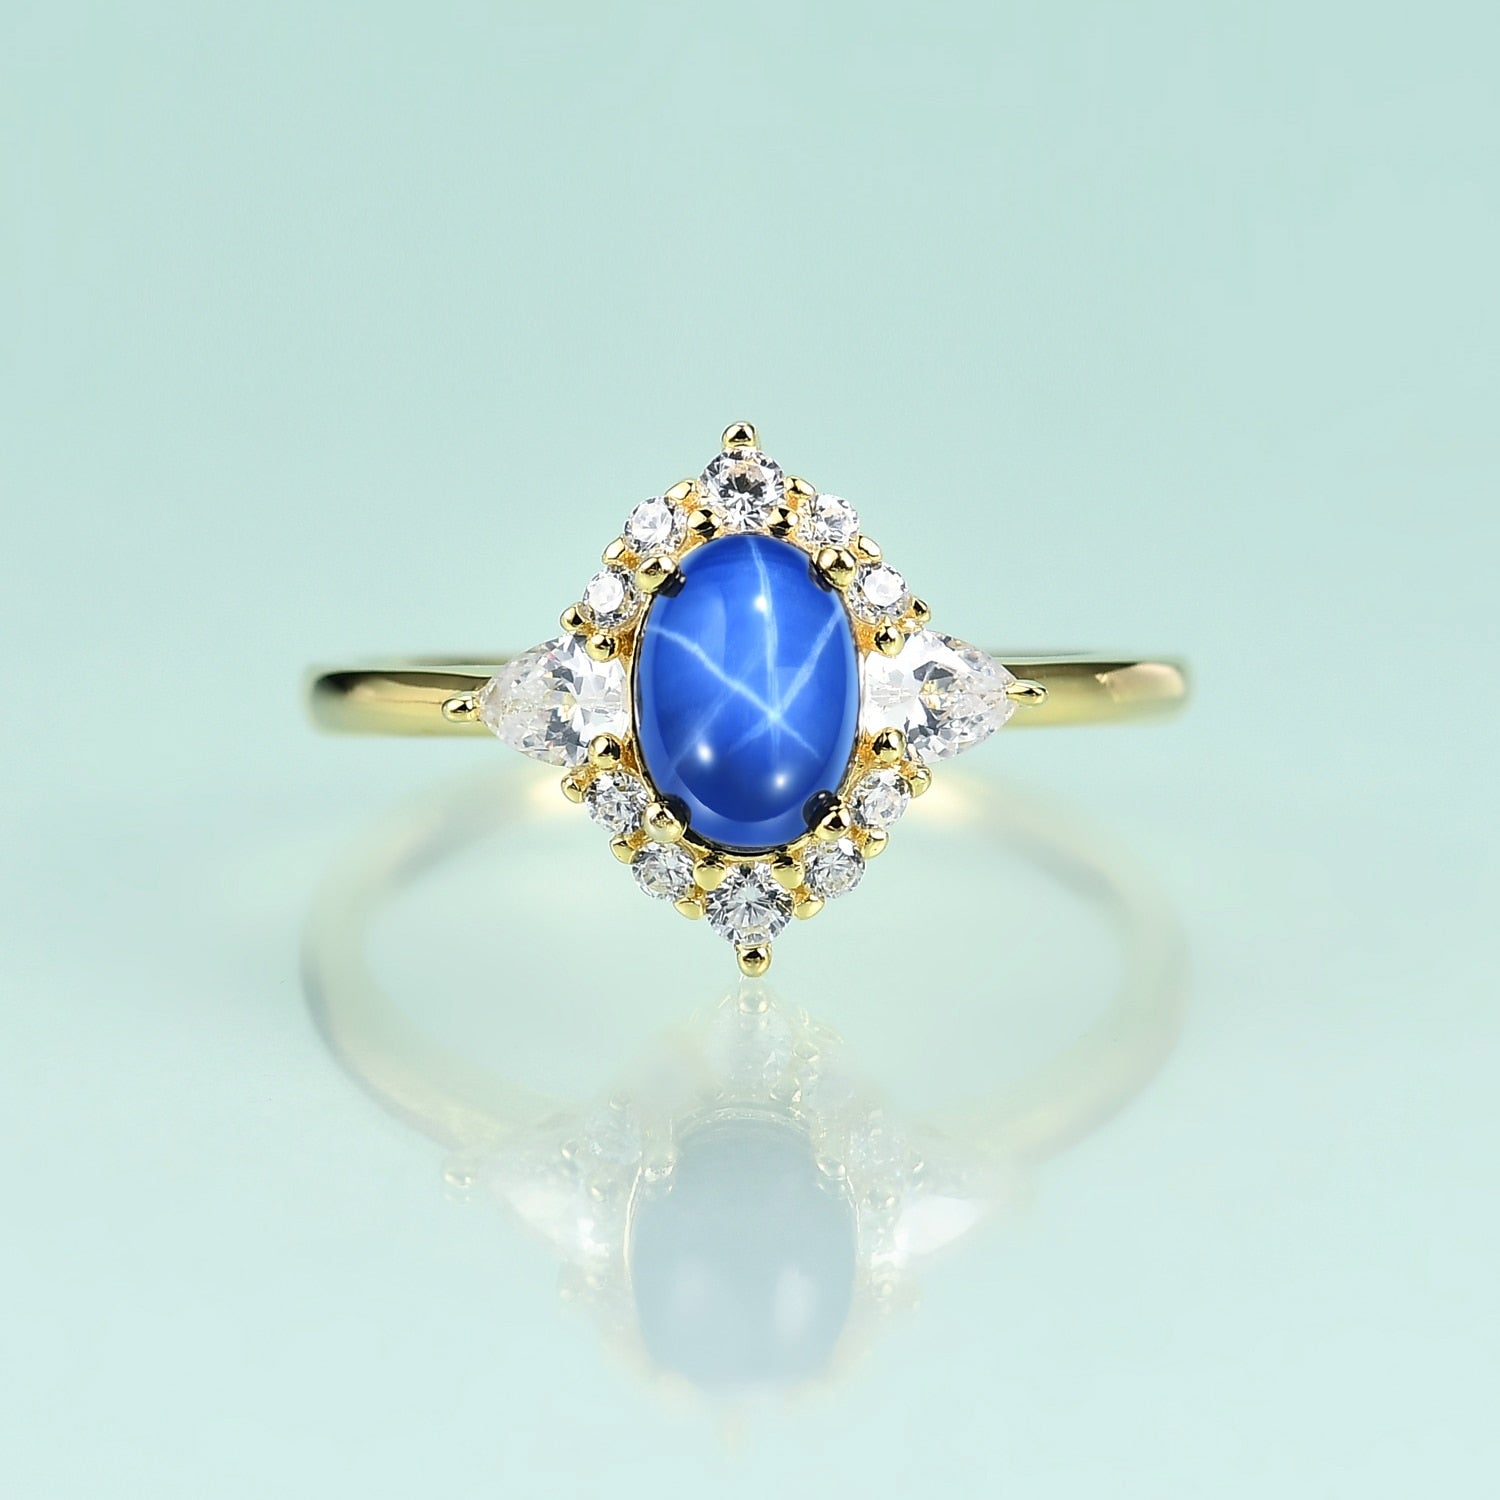 Blue star sapphire ring vintage style engagement ring Rosery Poetry